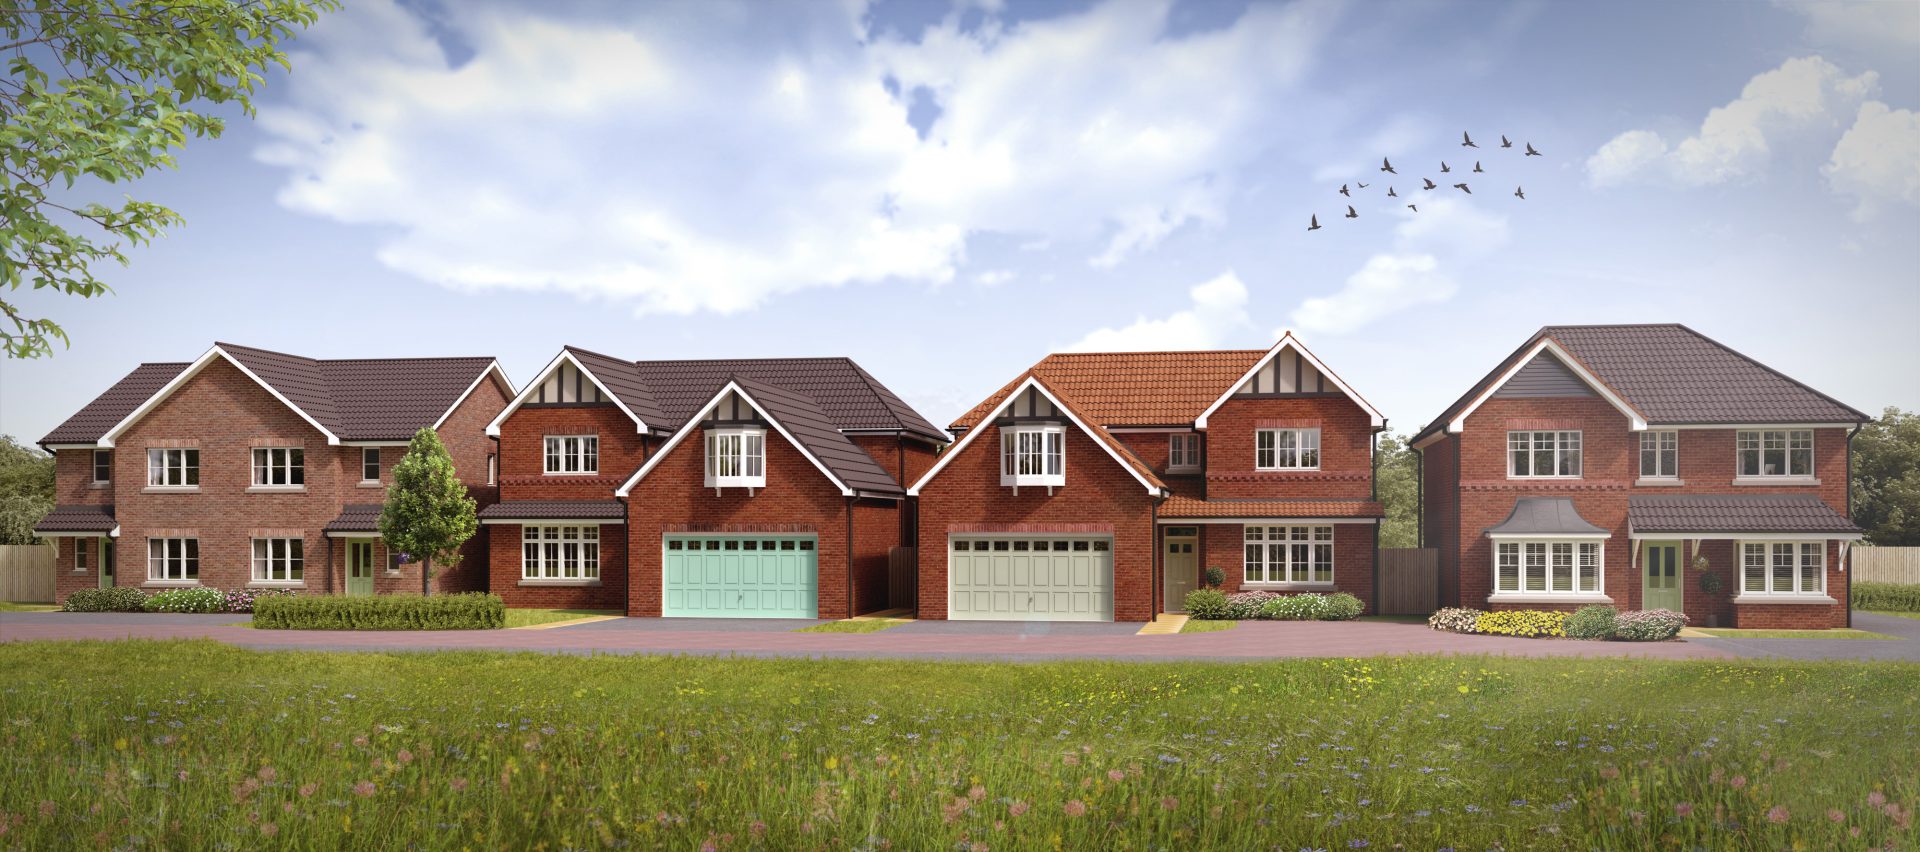 Nearly 1,000 people sign up to waiting list for new homes in Maltby, Yorkshire